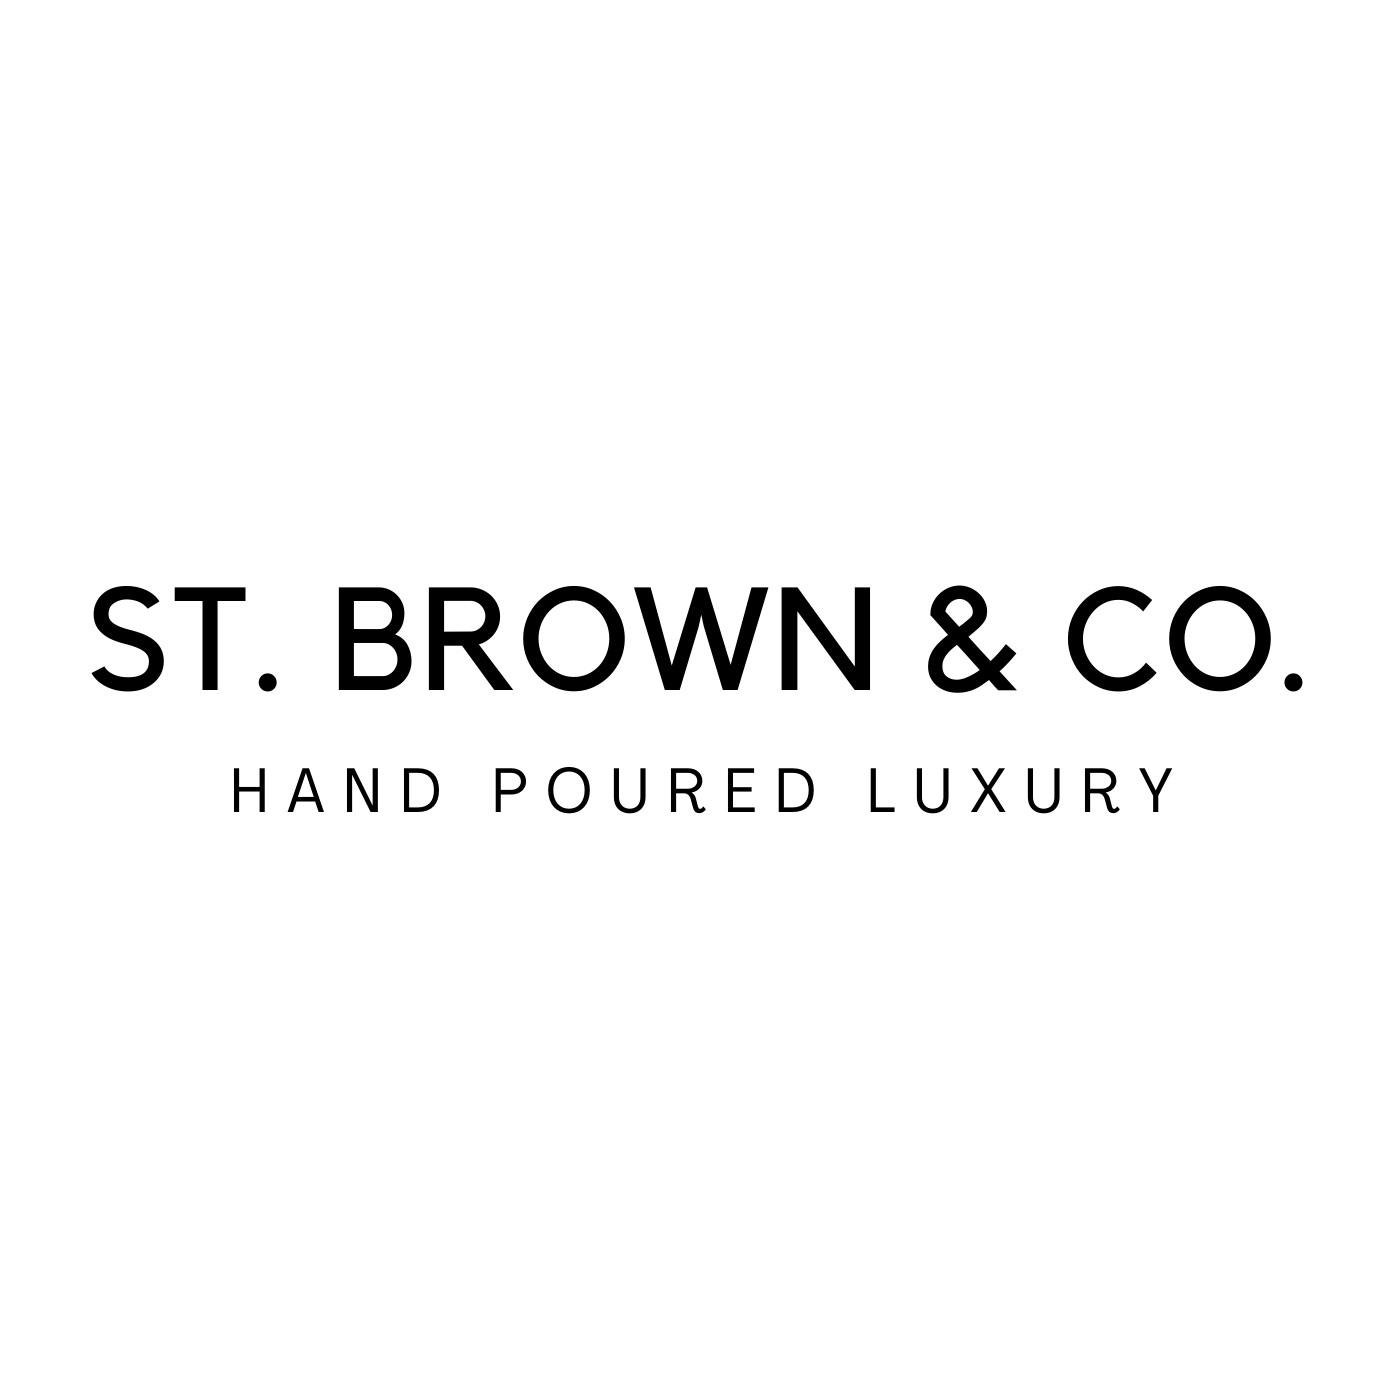 St. Brown & Co.